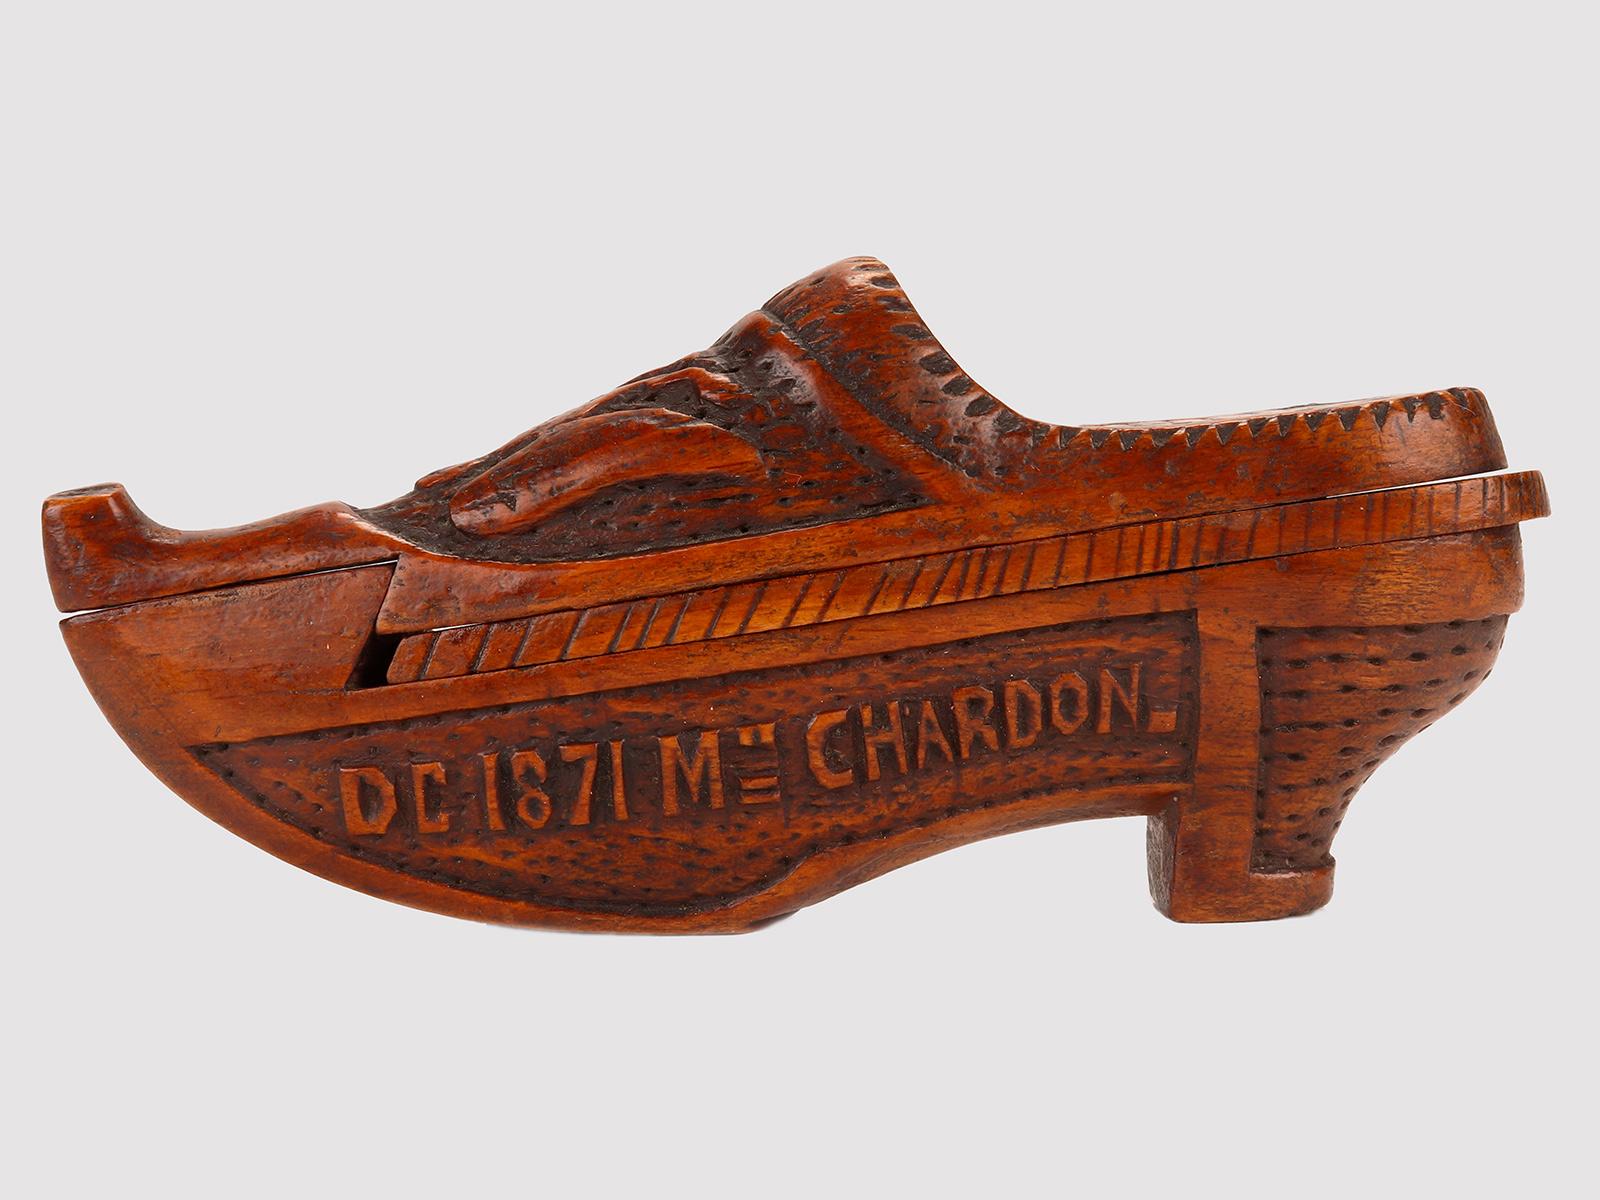 The snuffbox is in hazelnut wood carved in the shape of a shoe. The top opens to reveal a second part, with a lid that opens to reveal the tobacco container. On one external side, the dedication by D.C. is engraved. to Madame Chardon, in 1871, on